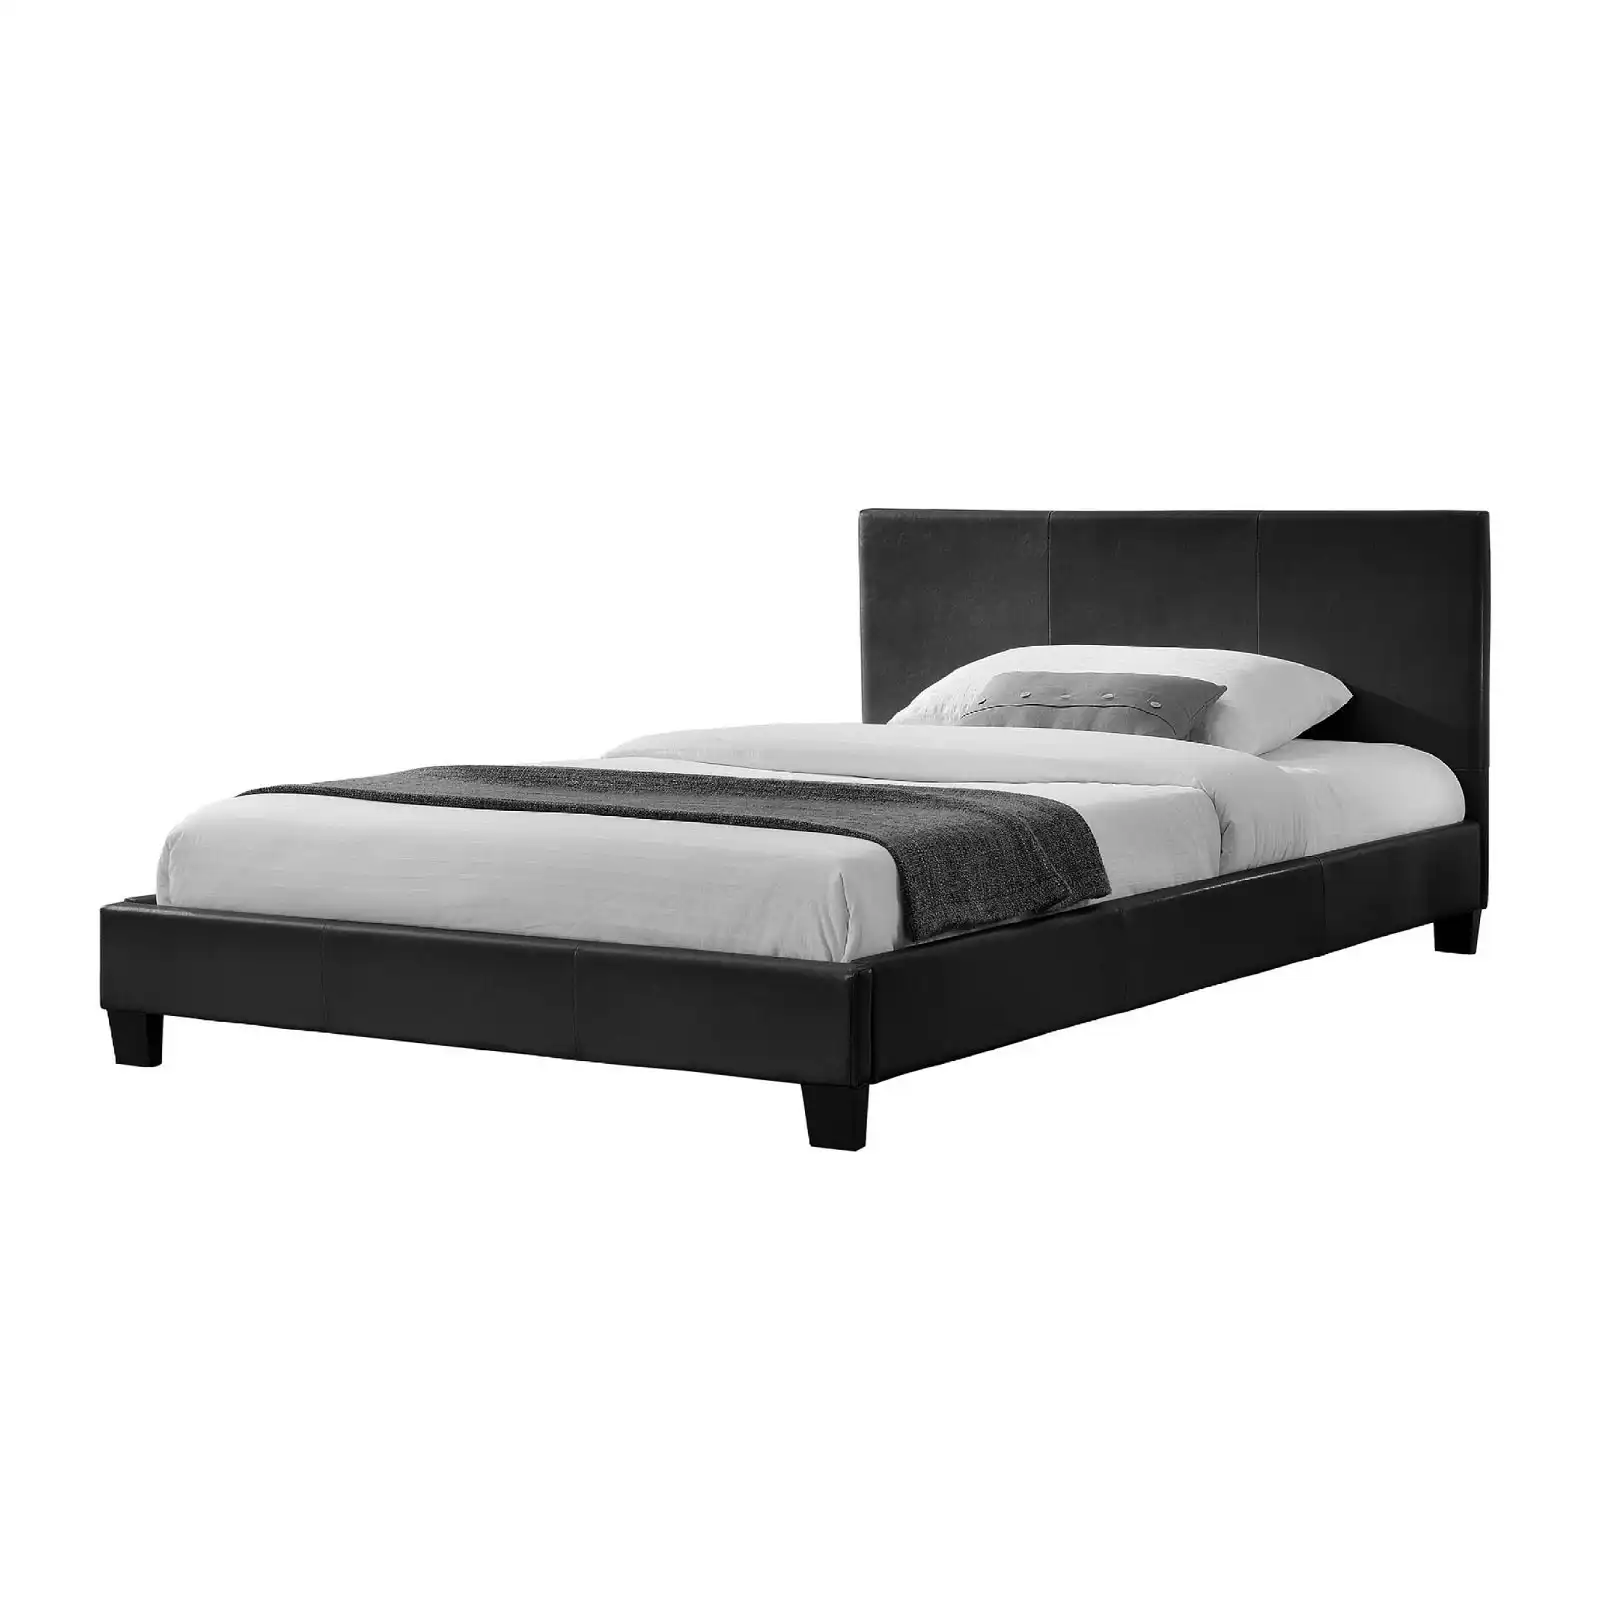 Monica PU Leather Double Bed - Black